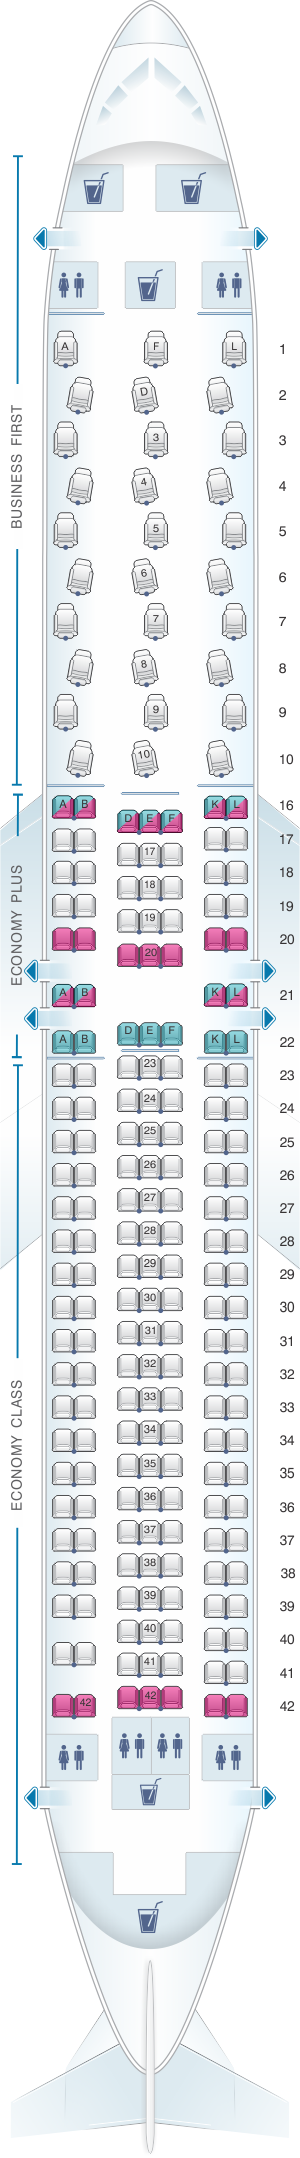 Seat map for United Airlines Boeing B767 300ER - version 1